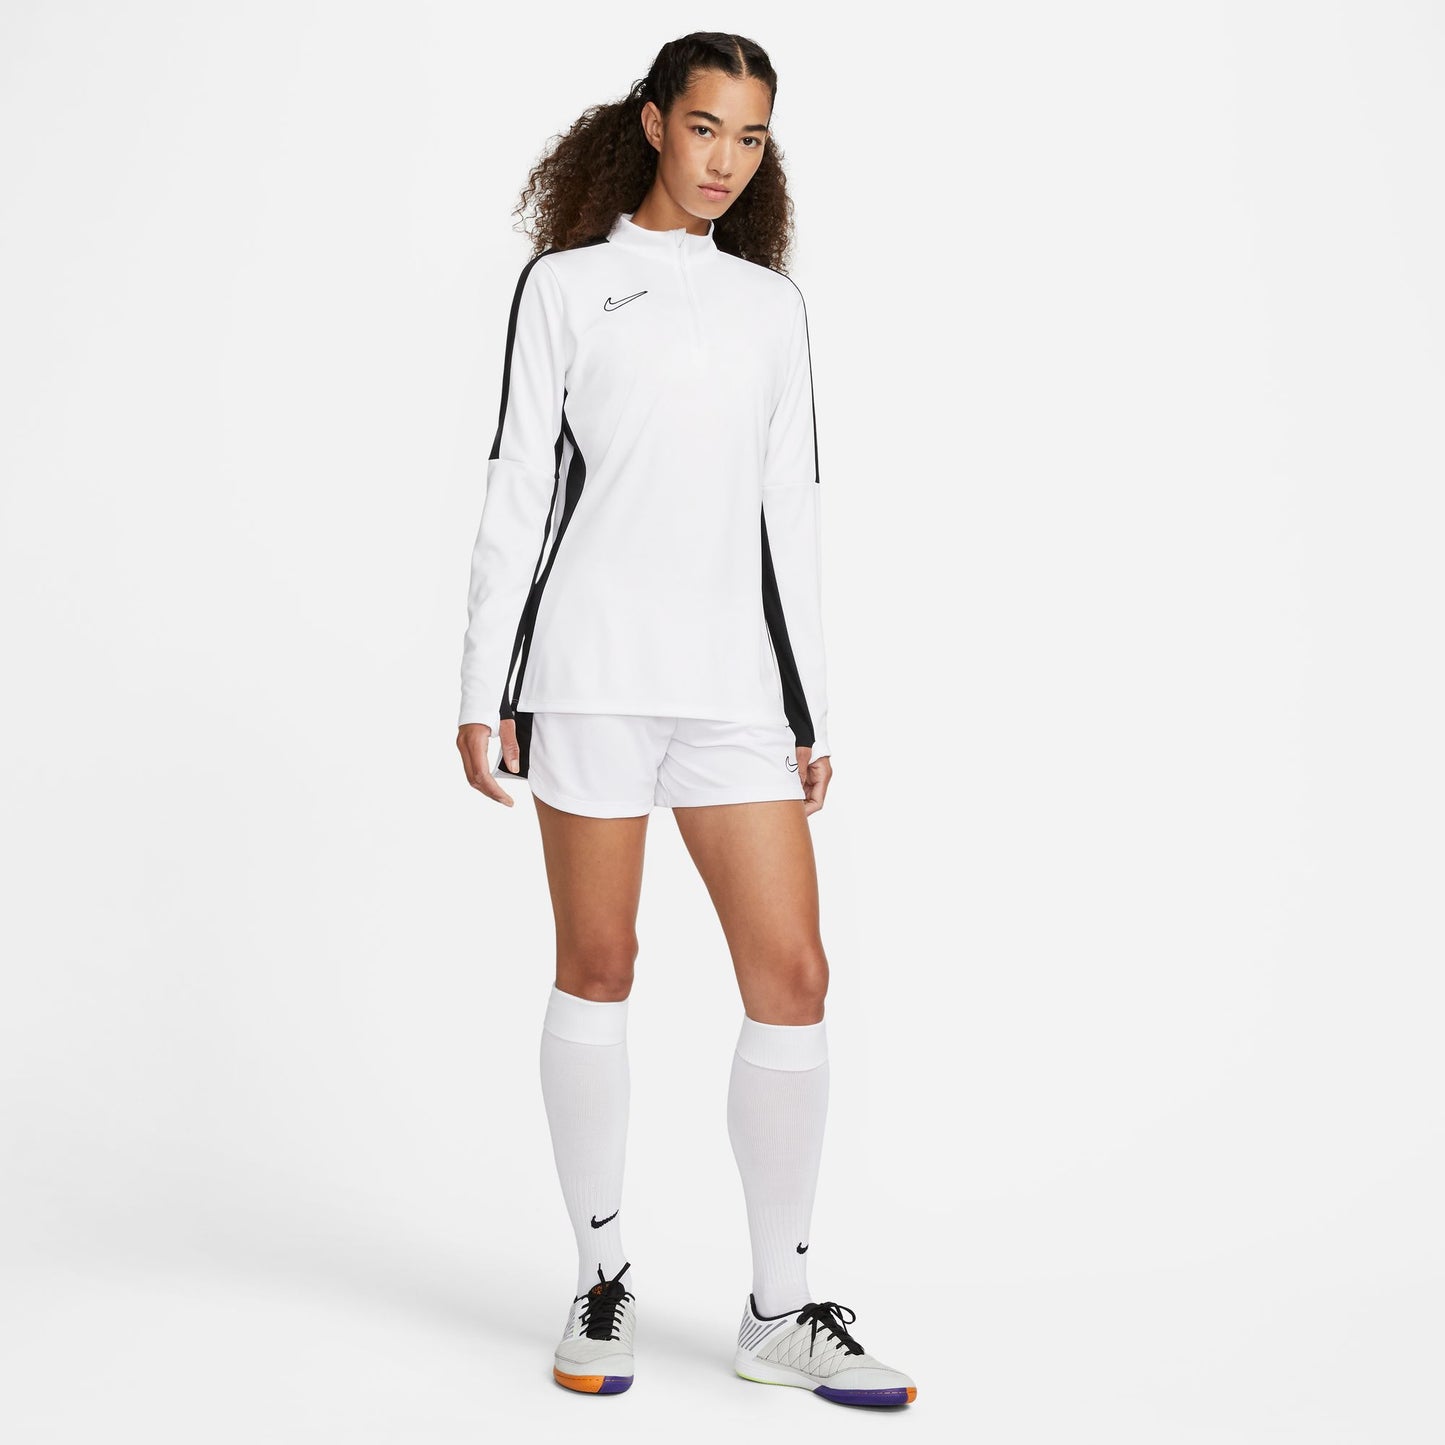 Nike Dri-FIT Academy - Women's Soccer Drill Top - White